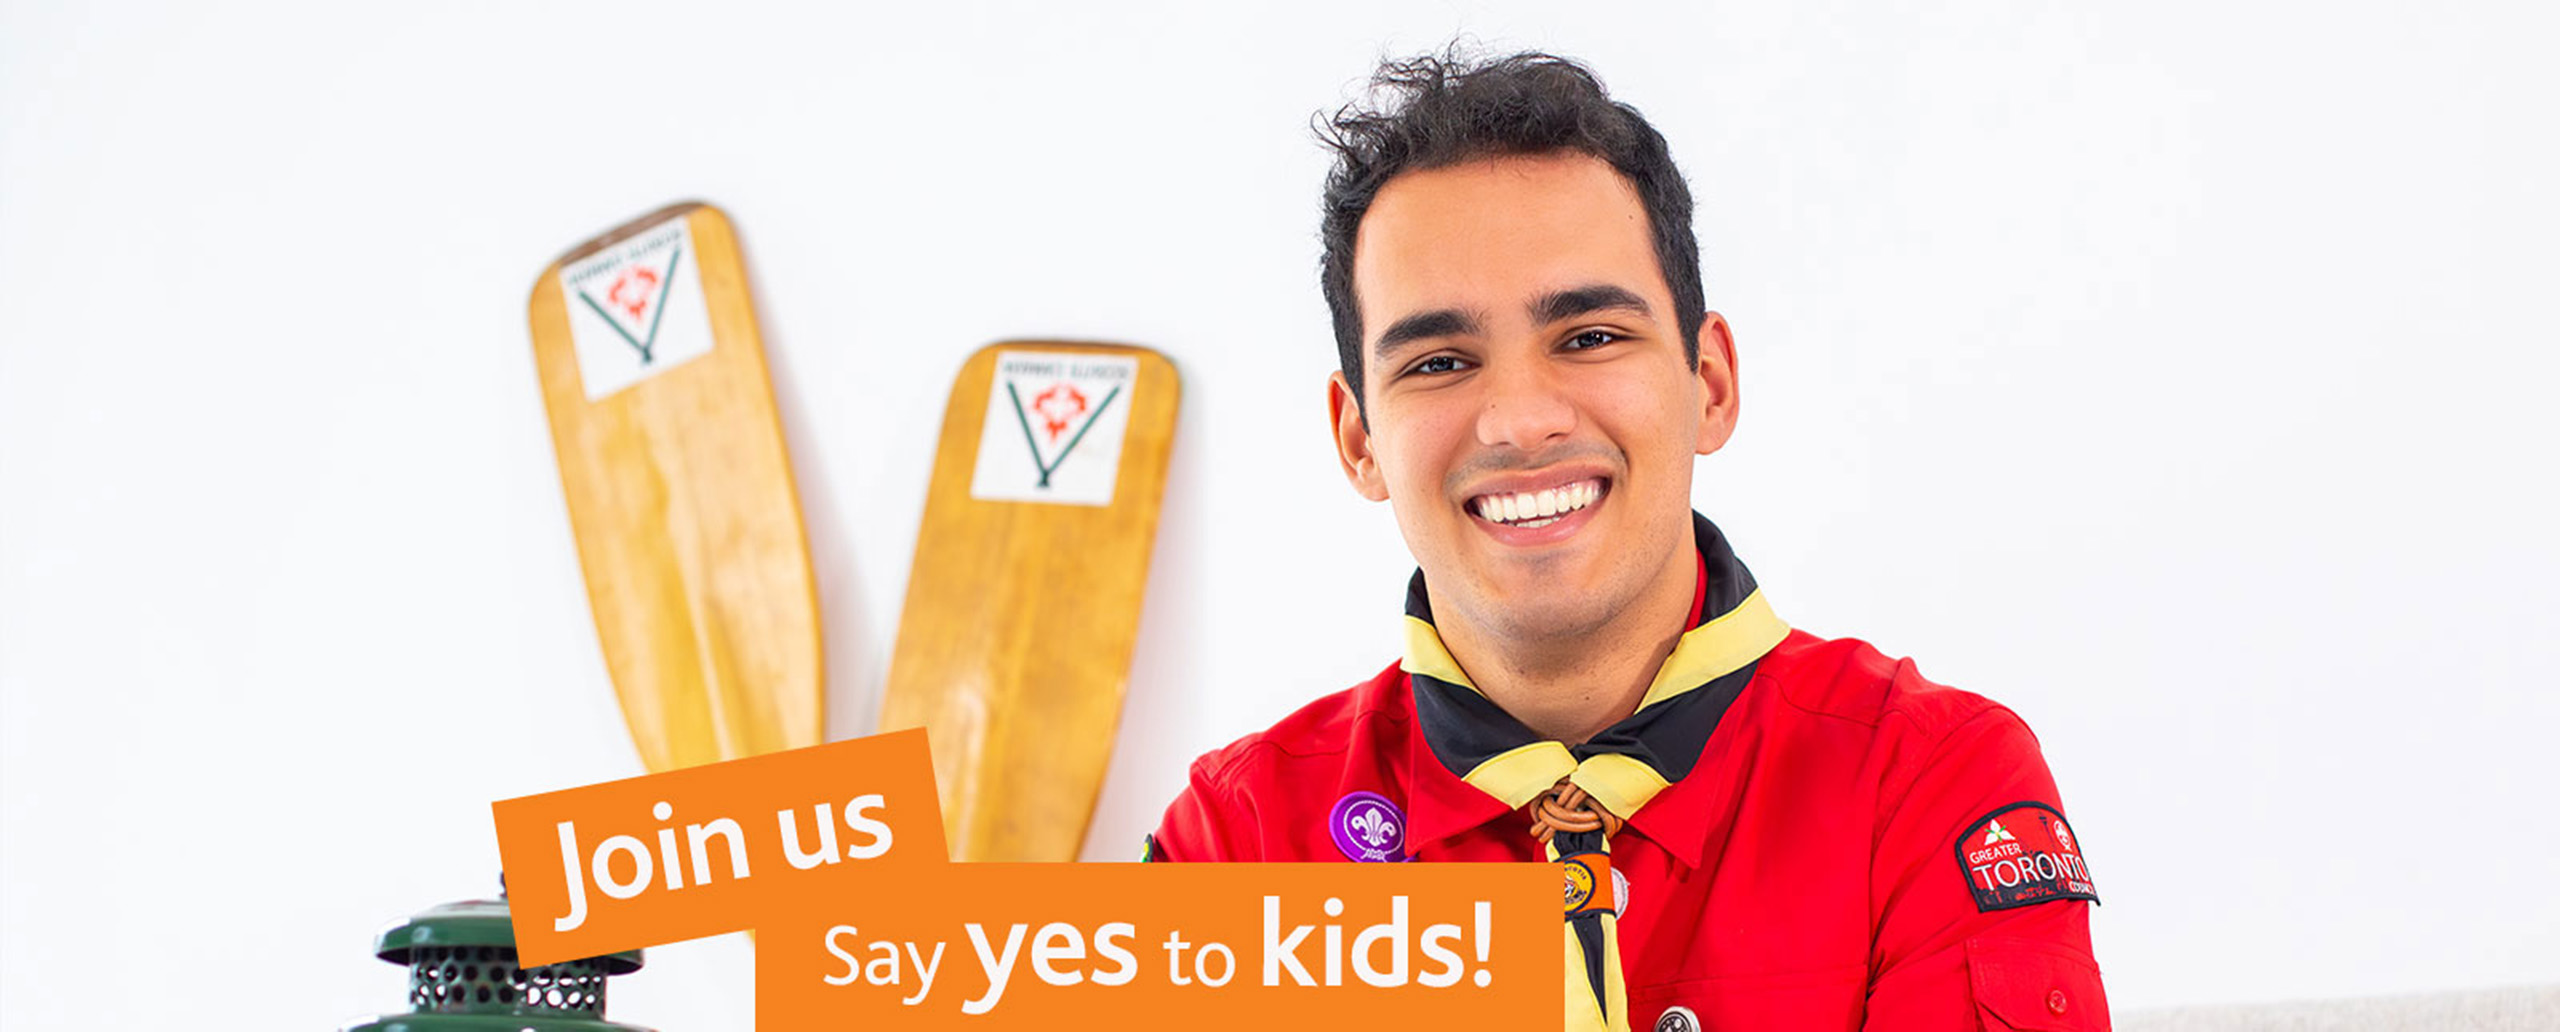 Join us Say yes to kids!